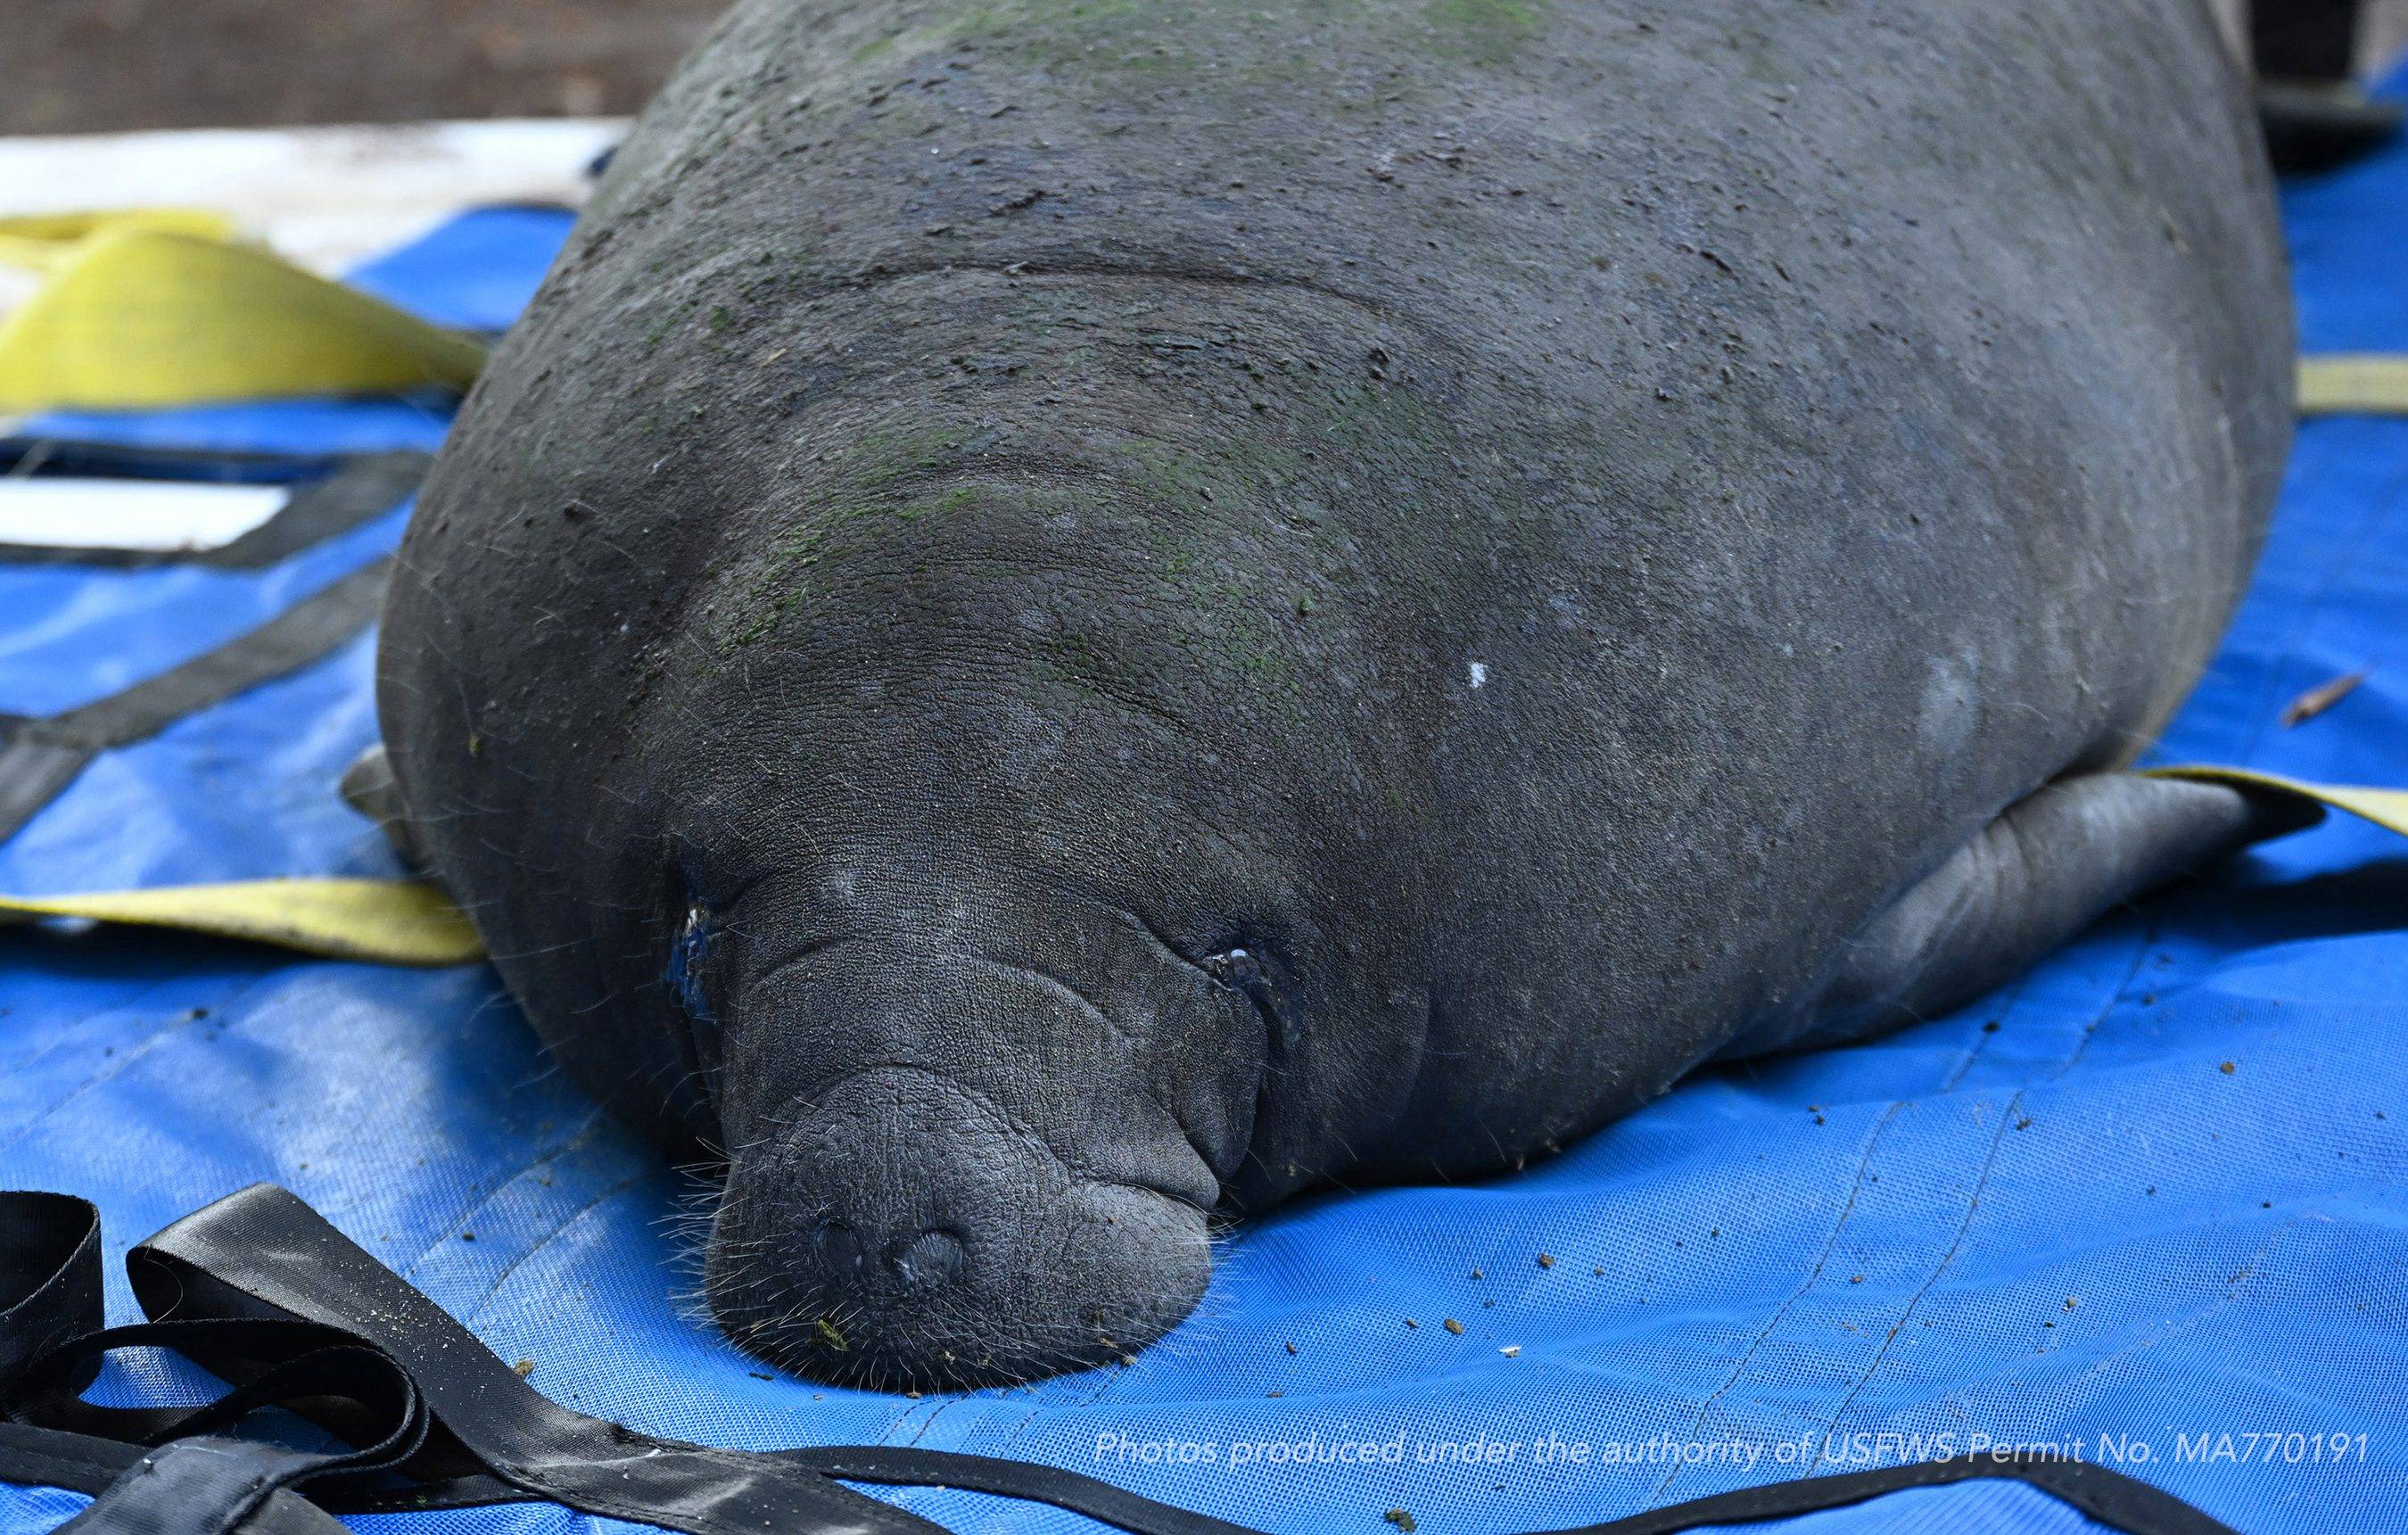 Disney Assists with Successful Rehabilitation and Release of Manatee